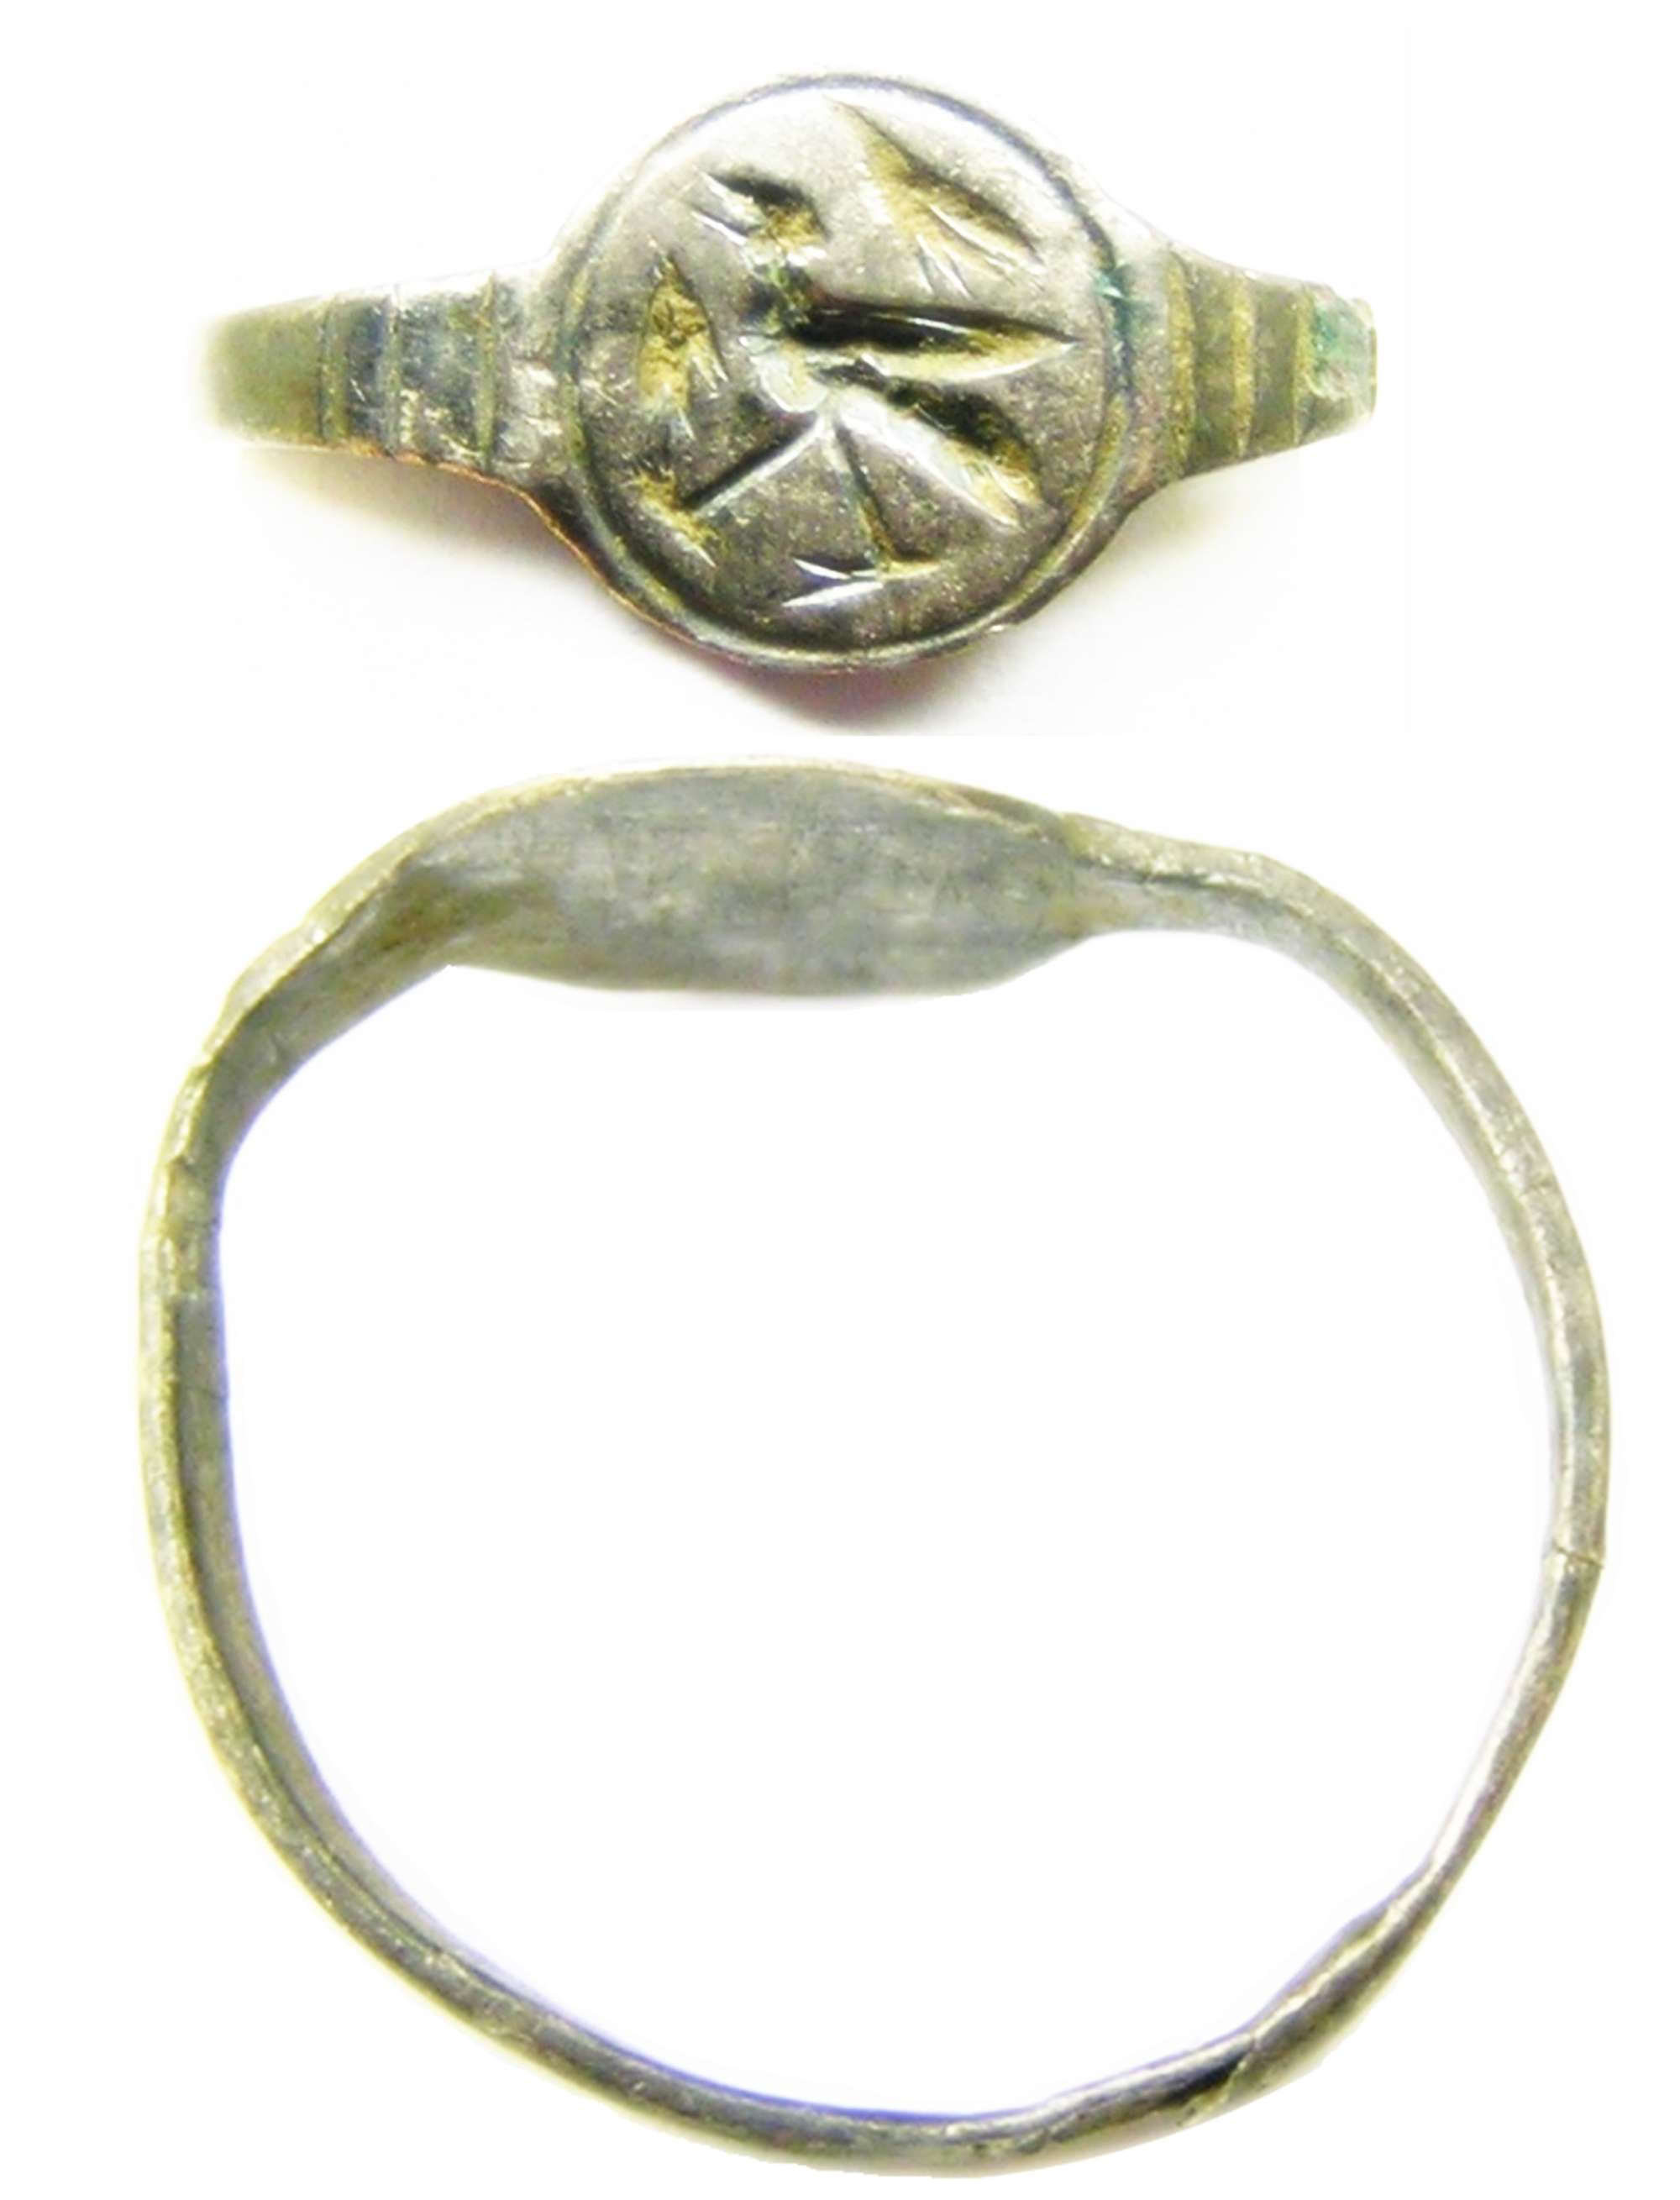 Medieval silver signet ring of a falcon or eagle